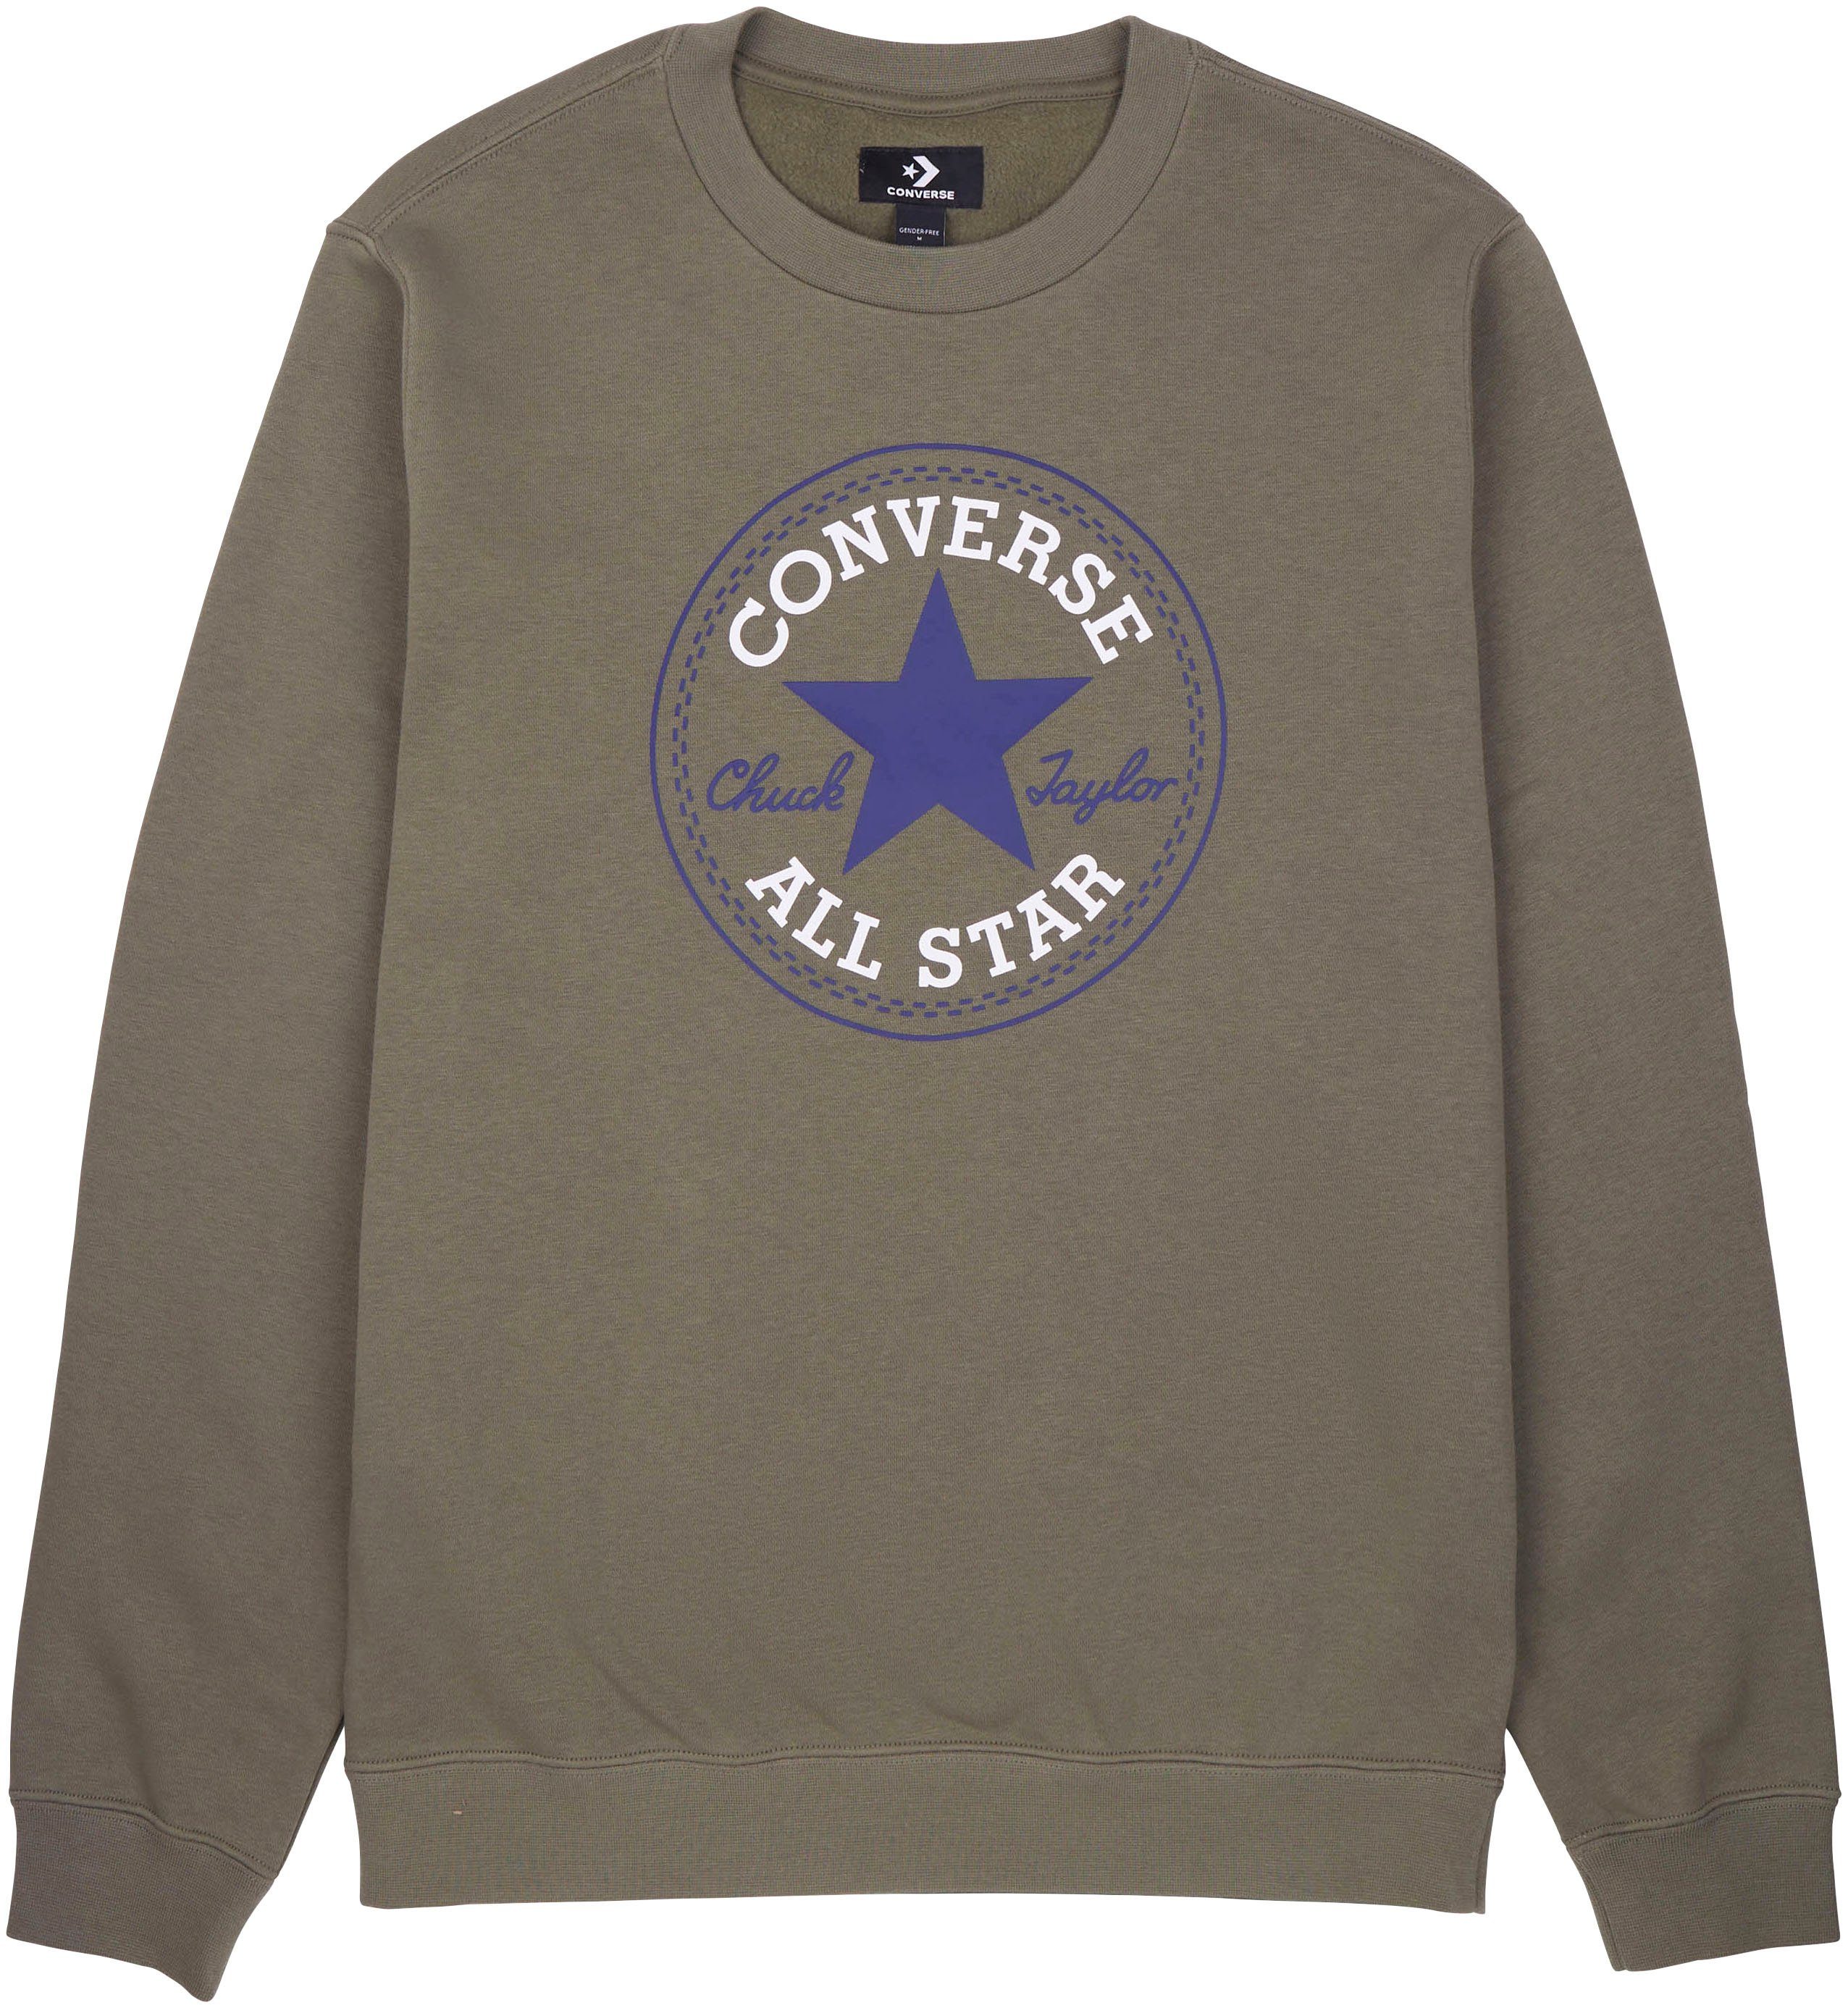 Converse Sweatshirt UNISEX ALL BRUSHED STAR olive PATCH BACK